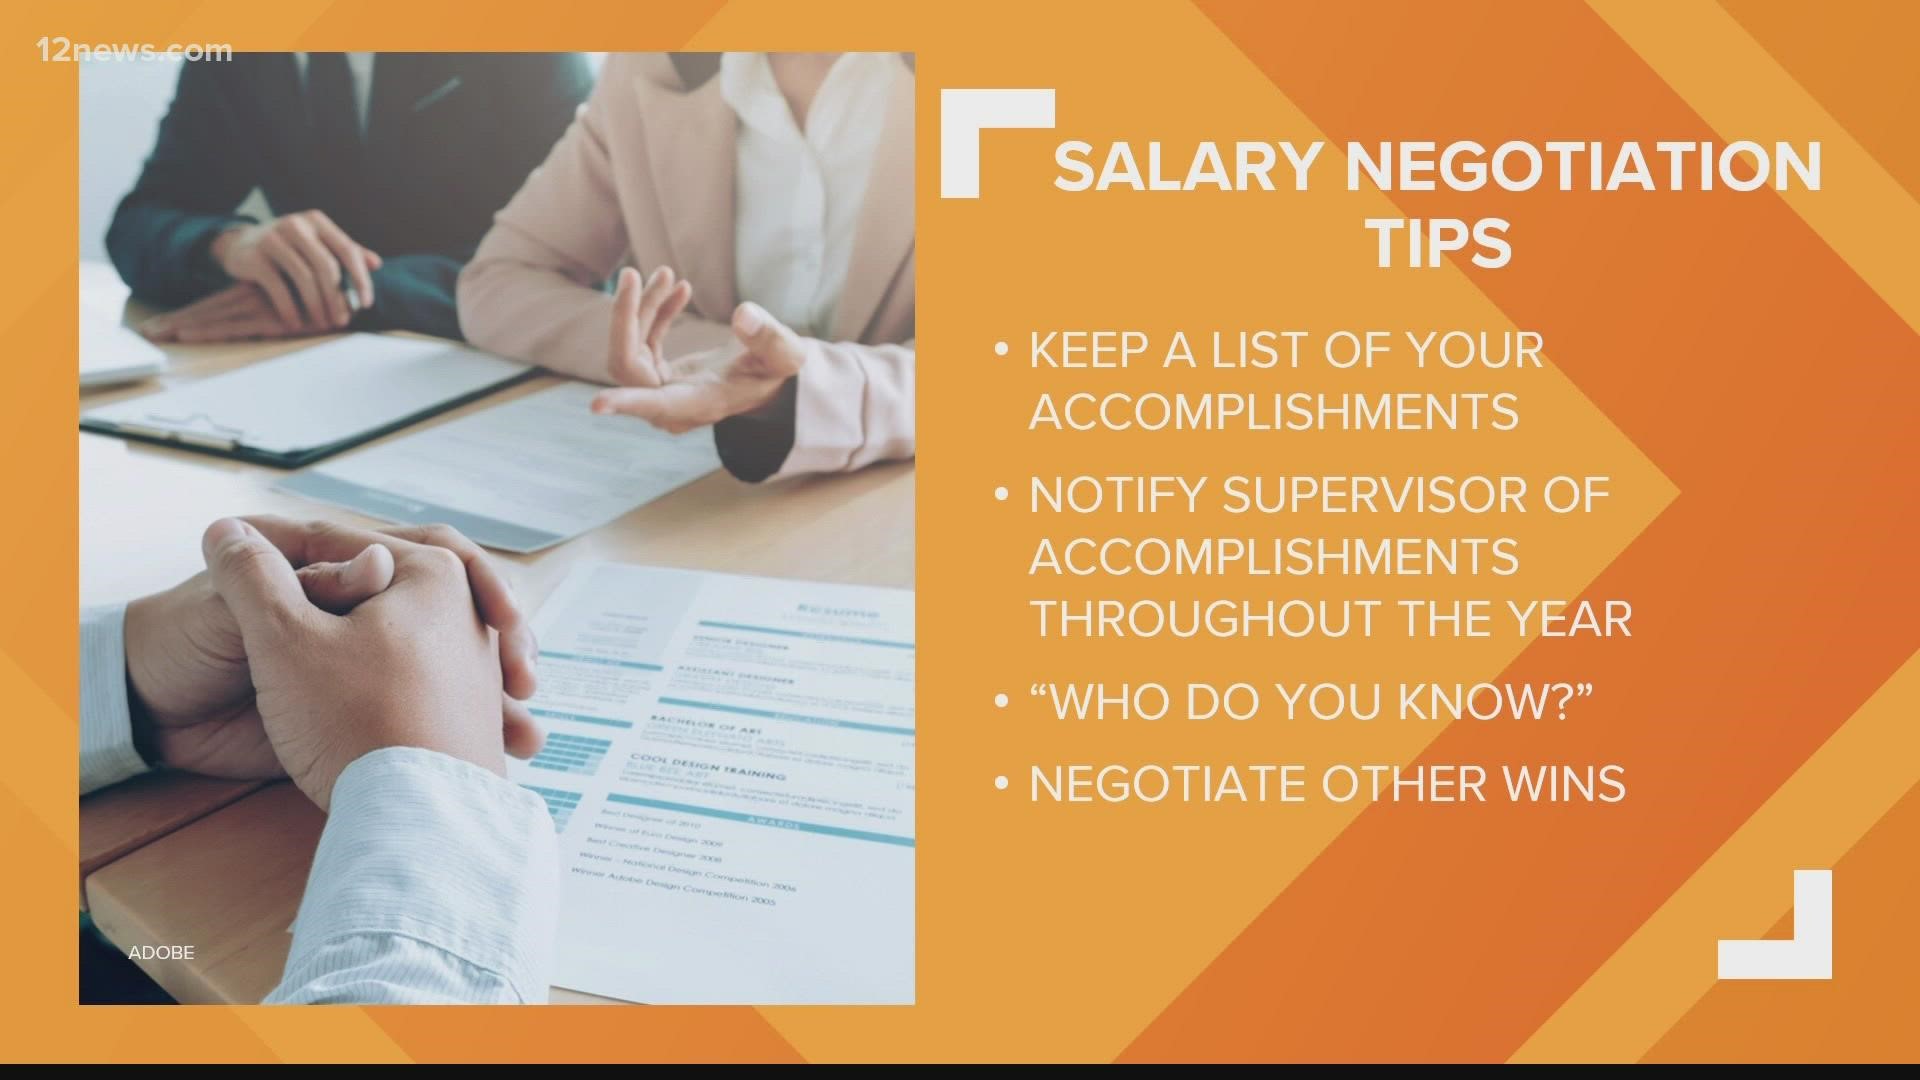 There are numerous tips employees can use to negotiate better pay, including keeping a list of accomplishments, networking and focusing on career wins.